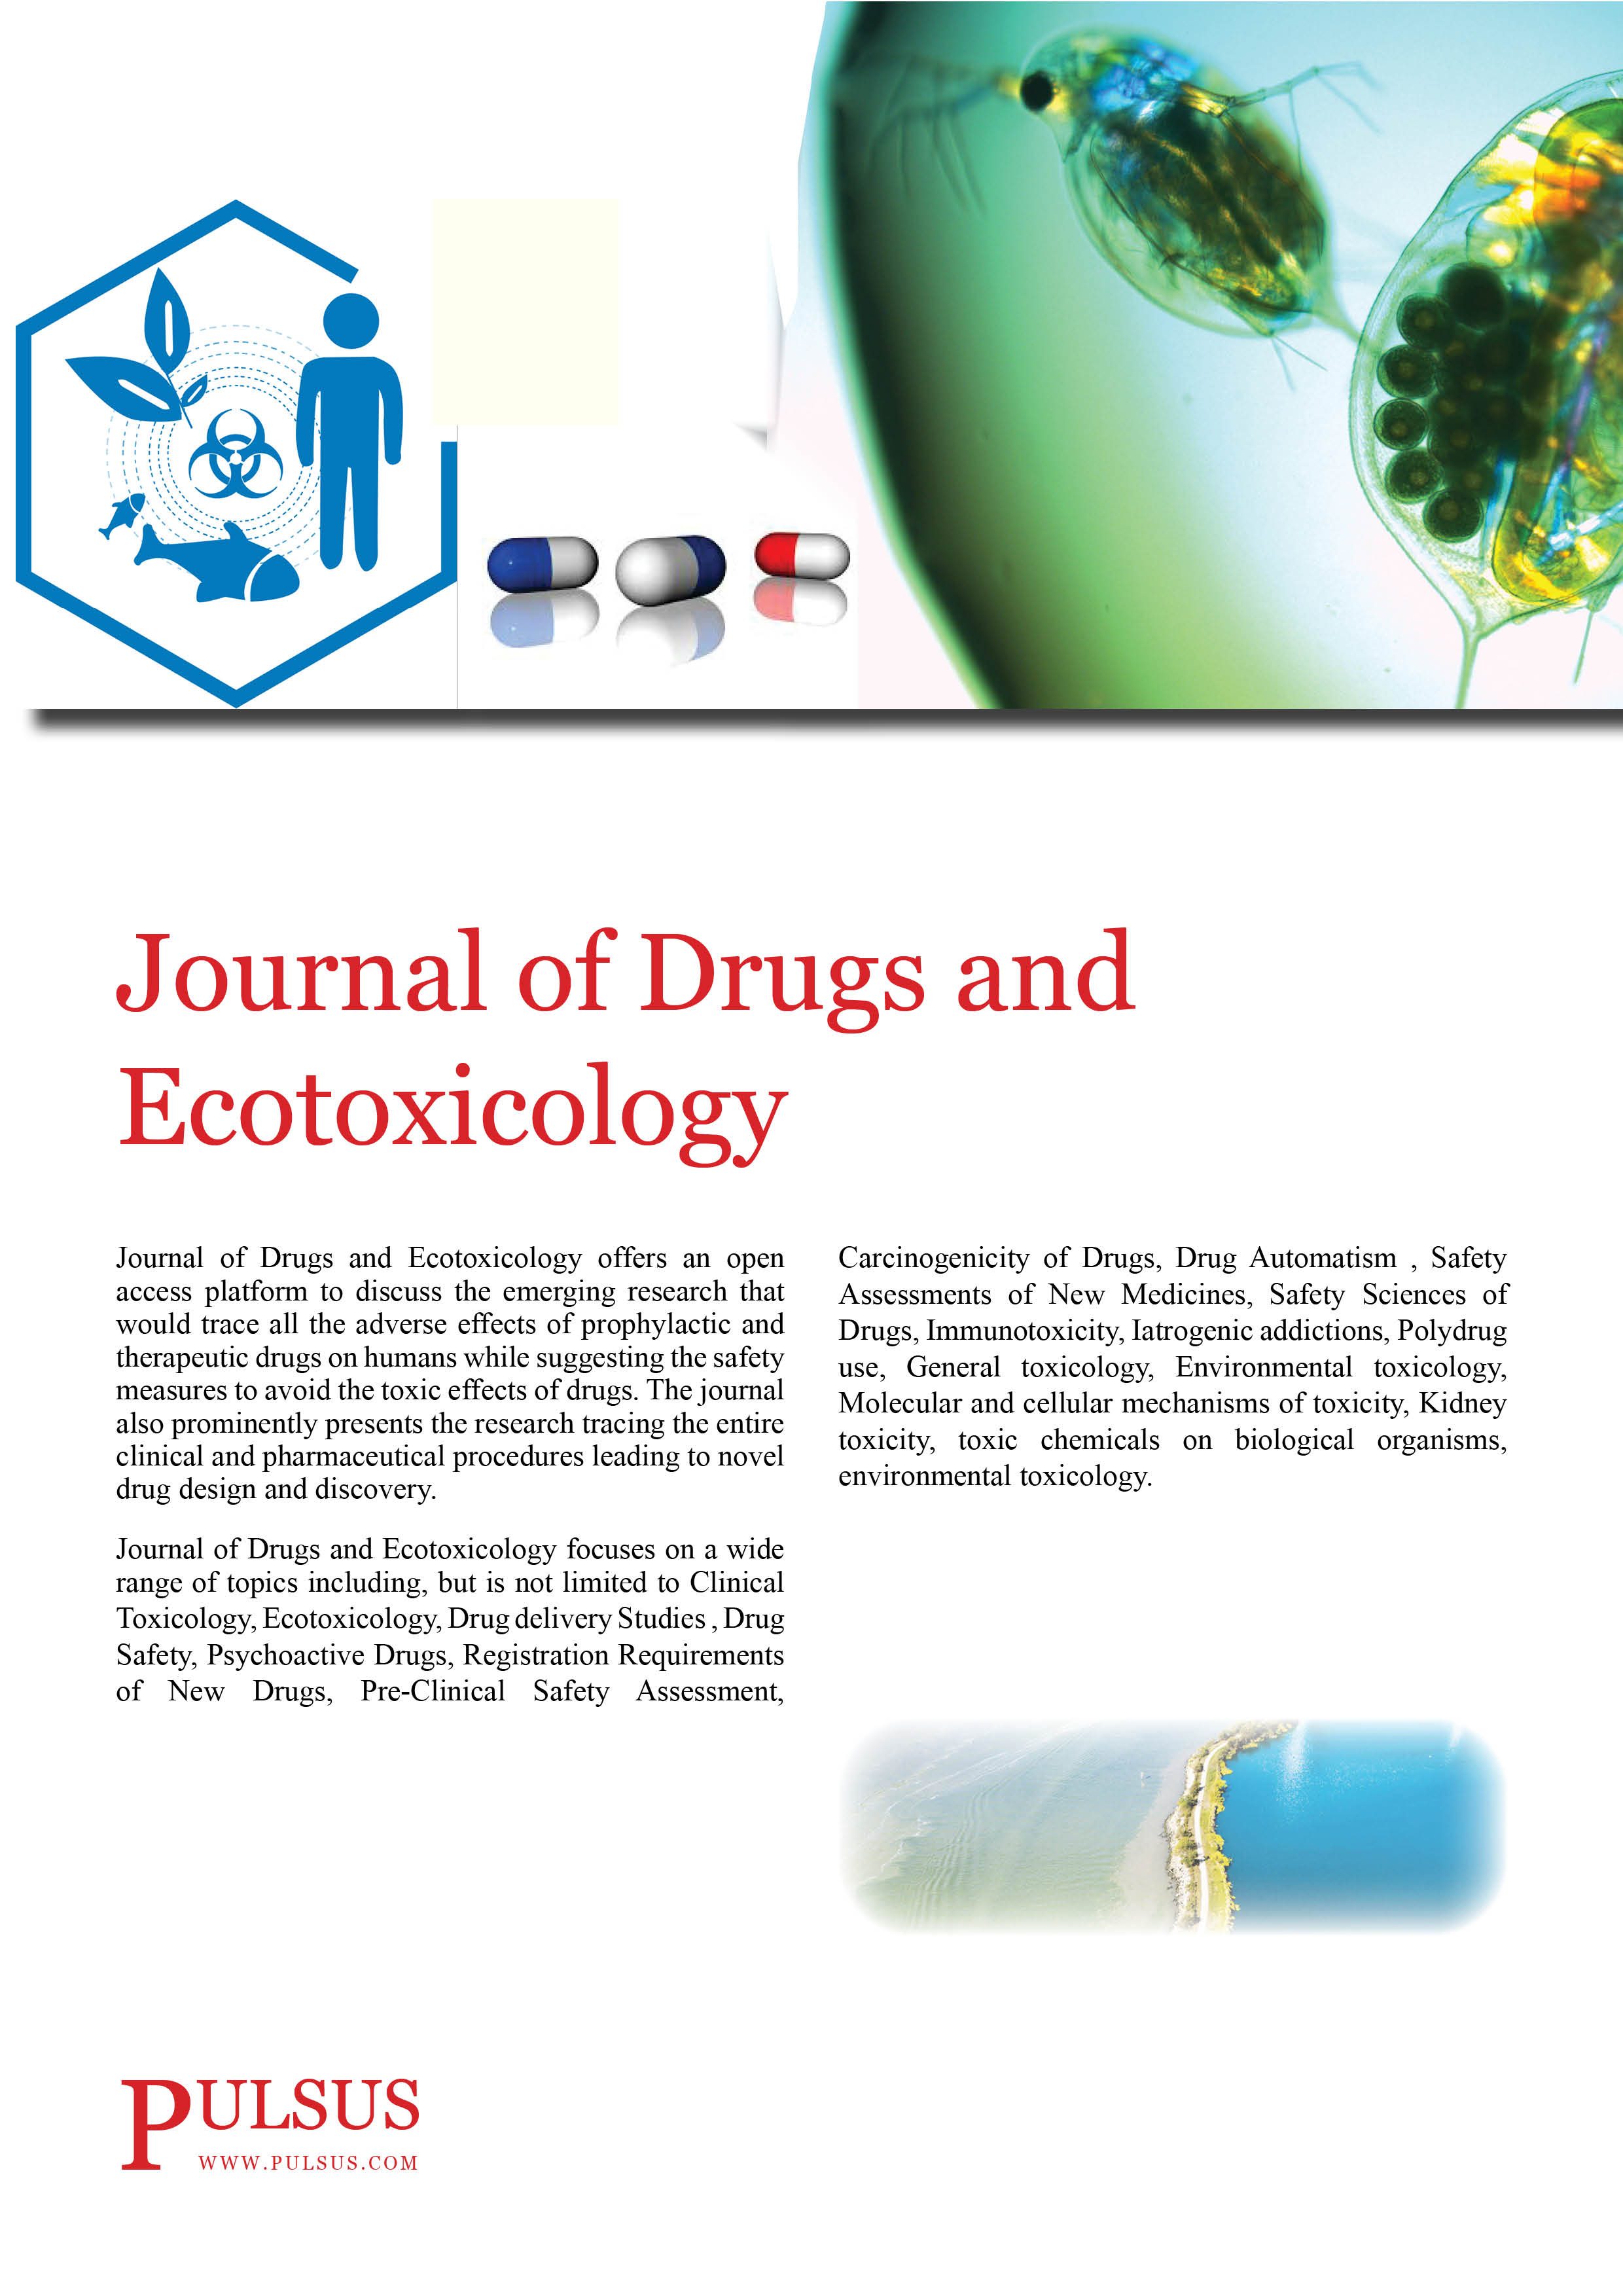 Journal of Drugs and Ecotoxicology